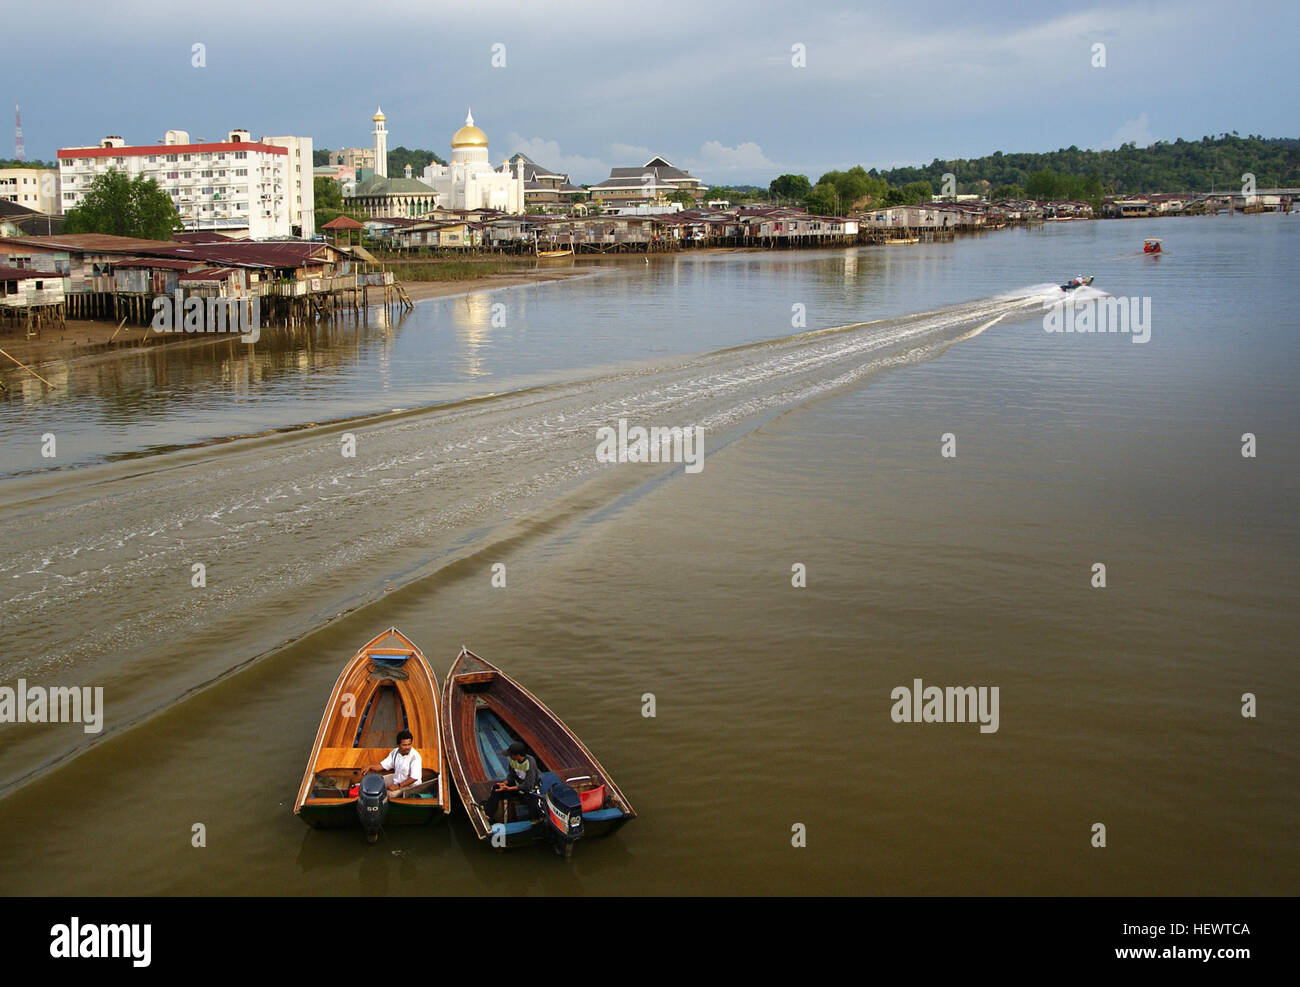 Water taxis ply the Brunei River, linking Bandar Seri Begawan's waterfront with the sultanate's most renowned water village, Kampung Ayer. Be prepared to haggle a bit over the fare. Speedboats link Bandar Seri Begawan with Bangar, the main town in Temburong District. Stock Photo